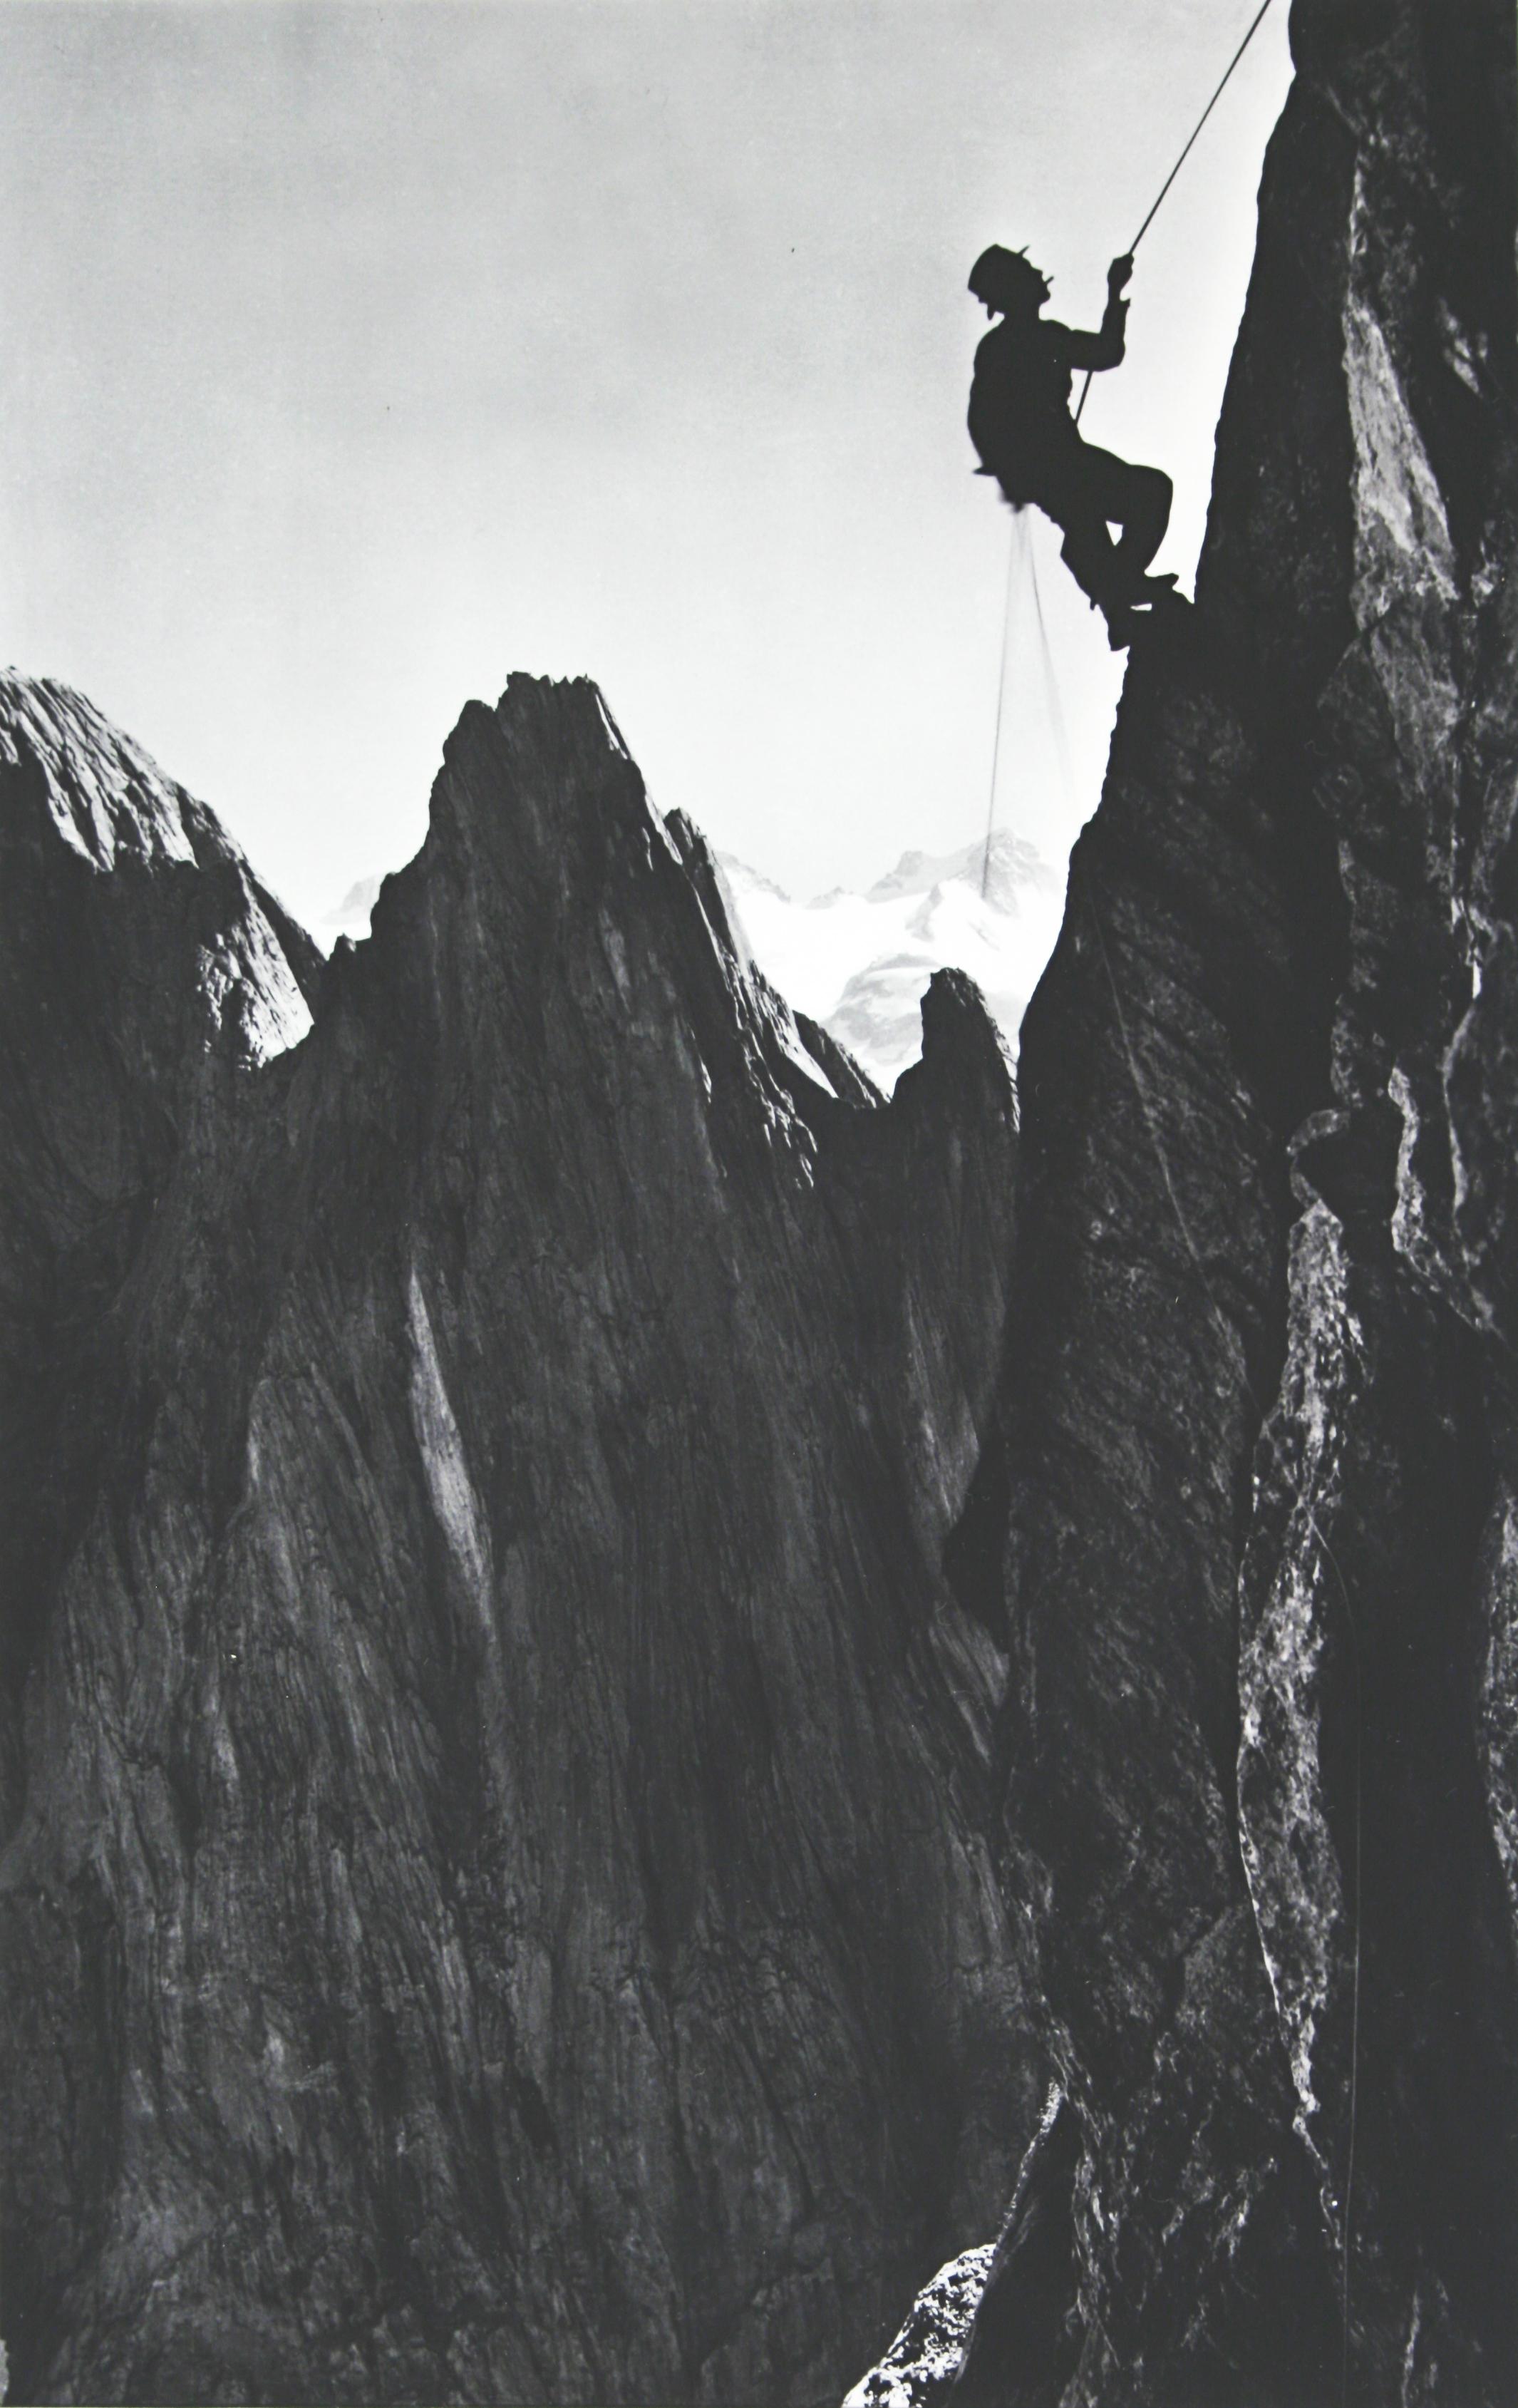 English Vintage Style Photography, Framed Alpine Ski Photograph, The Climber For Sale